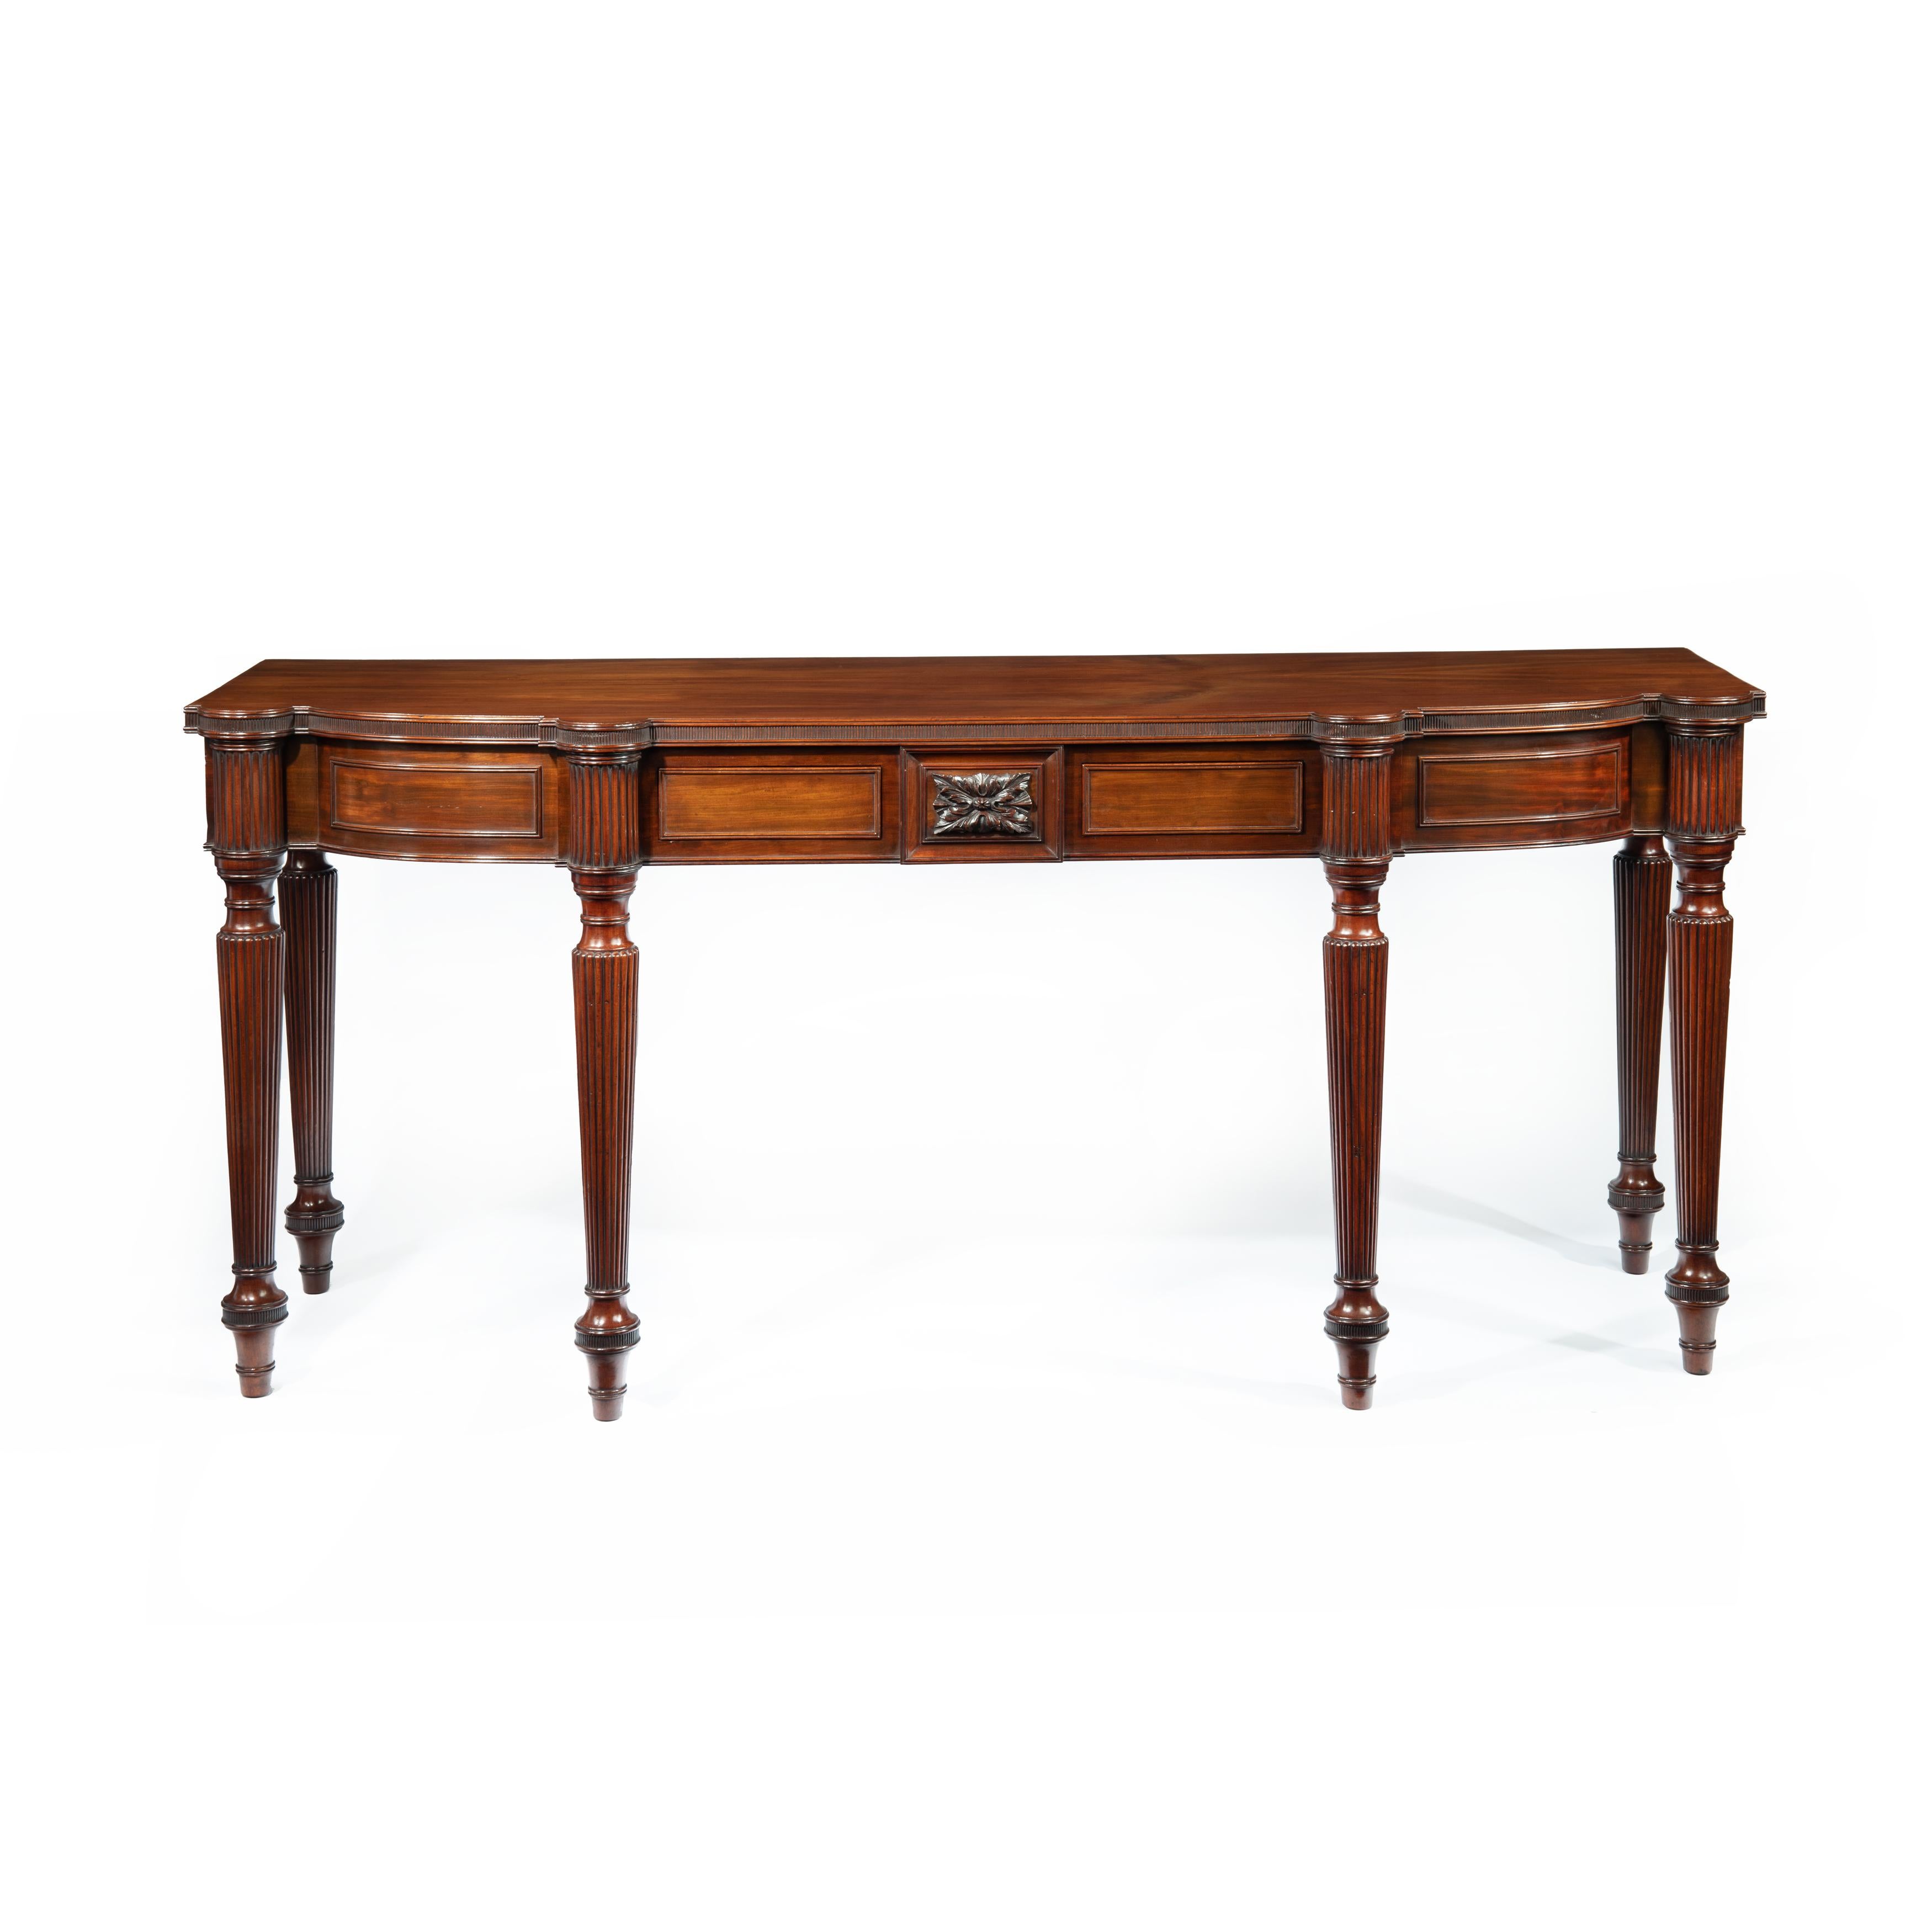 A Regency mahogany serving table attributed to Gillows, the shaped rectangular top with two small drawers and a central acanthus panel in the frieze, all raised on six turned and reeded legs. English, circa 1815.

Footnote: Gillows of Lancaster,